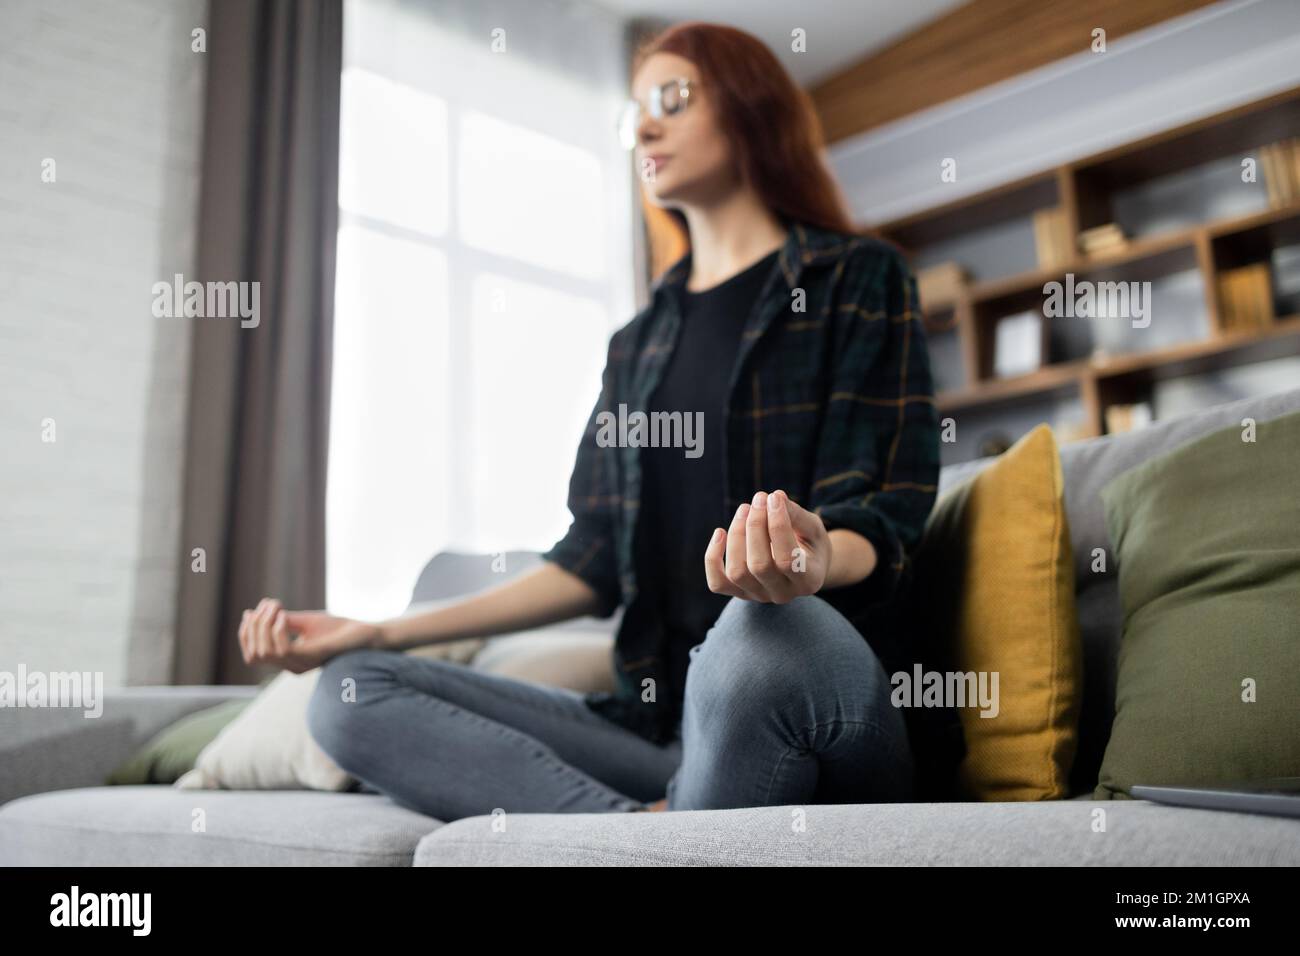 Yong female sitting on couch in lotus pose put hands on lap folded fingers closed eyes enjoy meditation do yoga exercise at home. No stress healthy habit mindfulness lifestyle anxiety relief concept Stock Photo